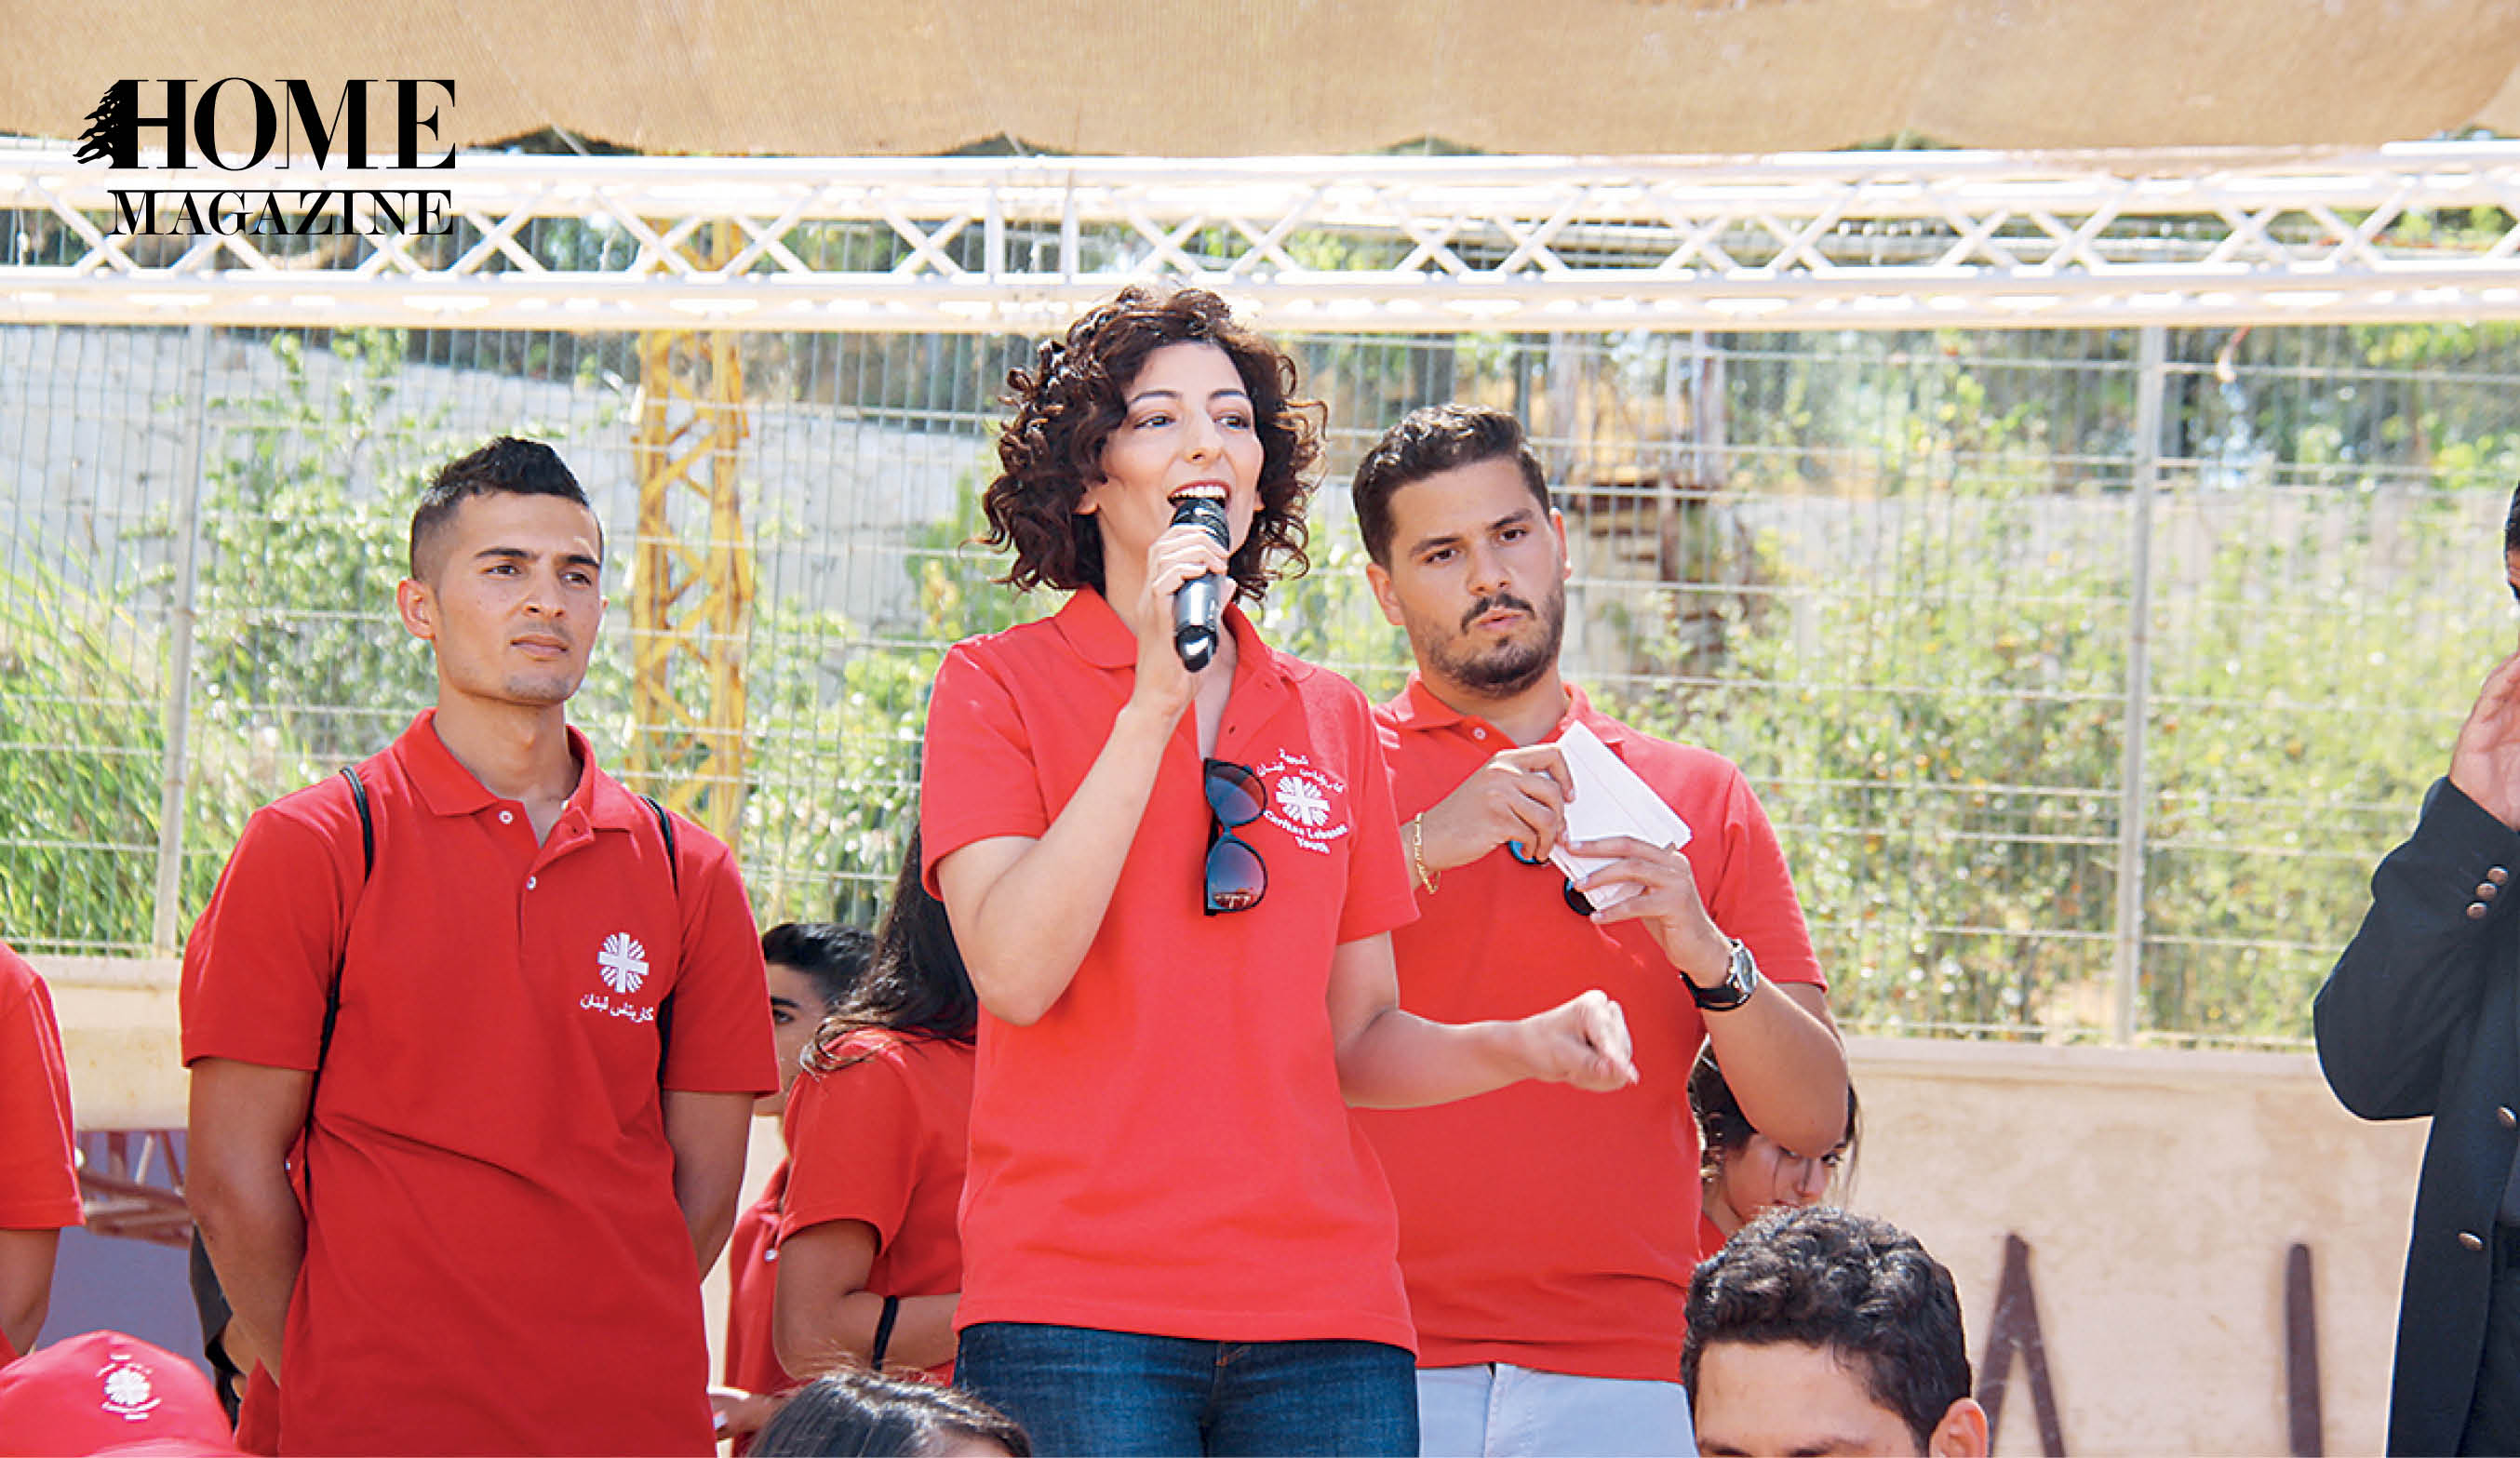 Woman in red tshirt speaking on microphone with two men in red tshirts behind